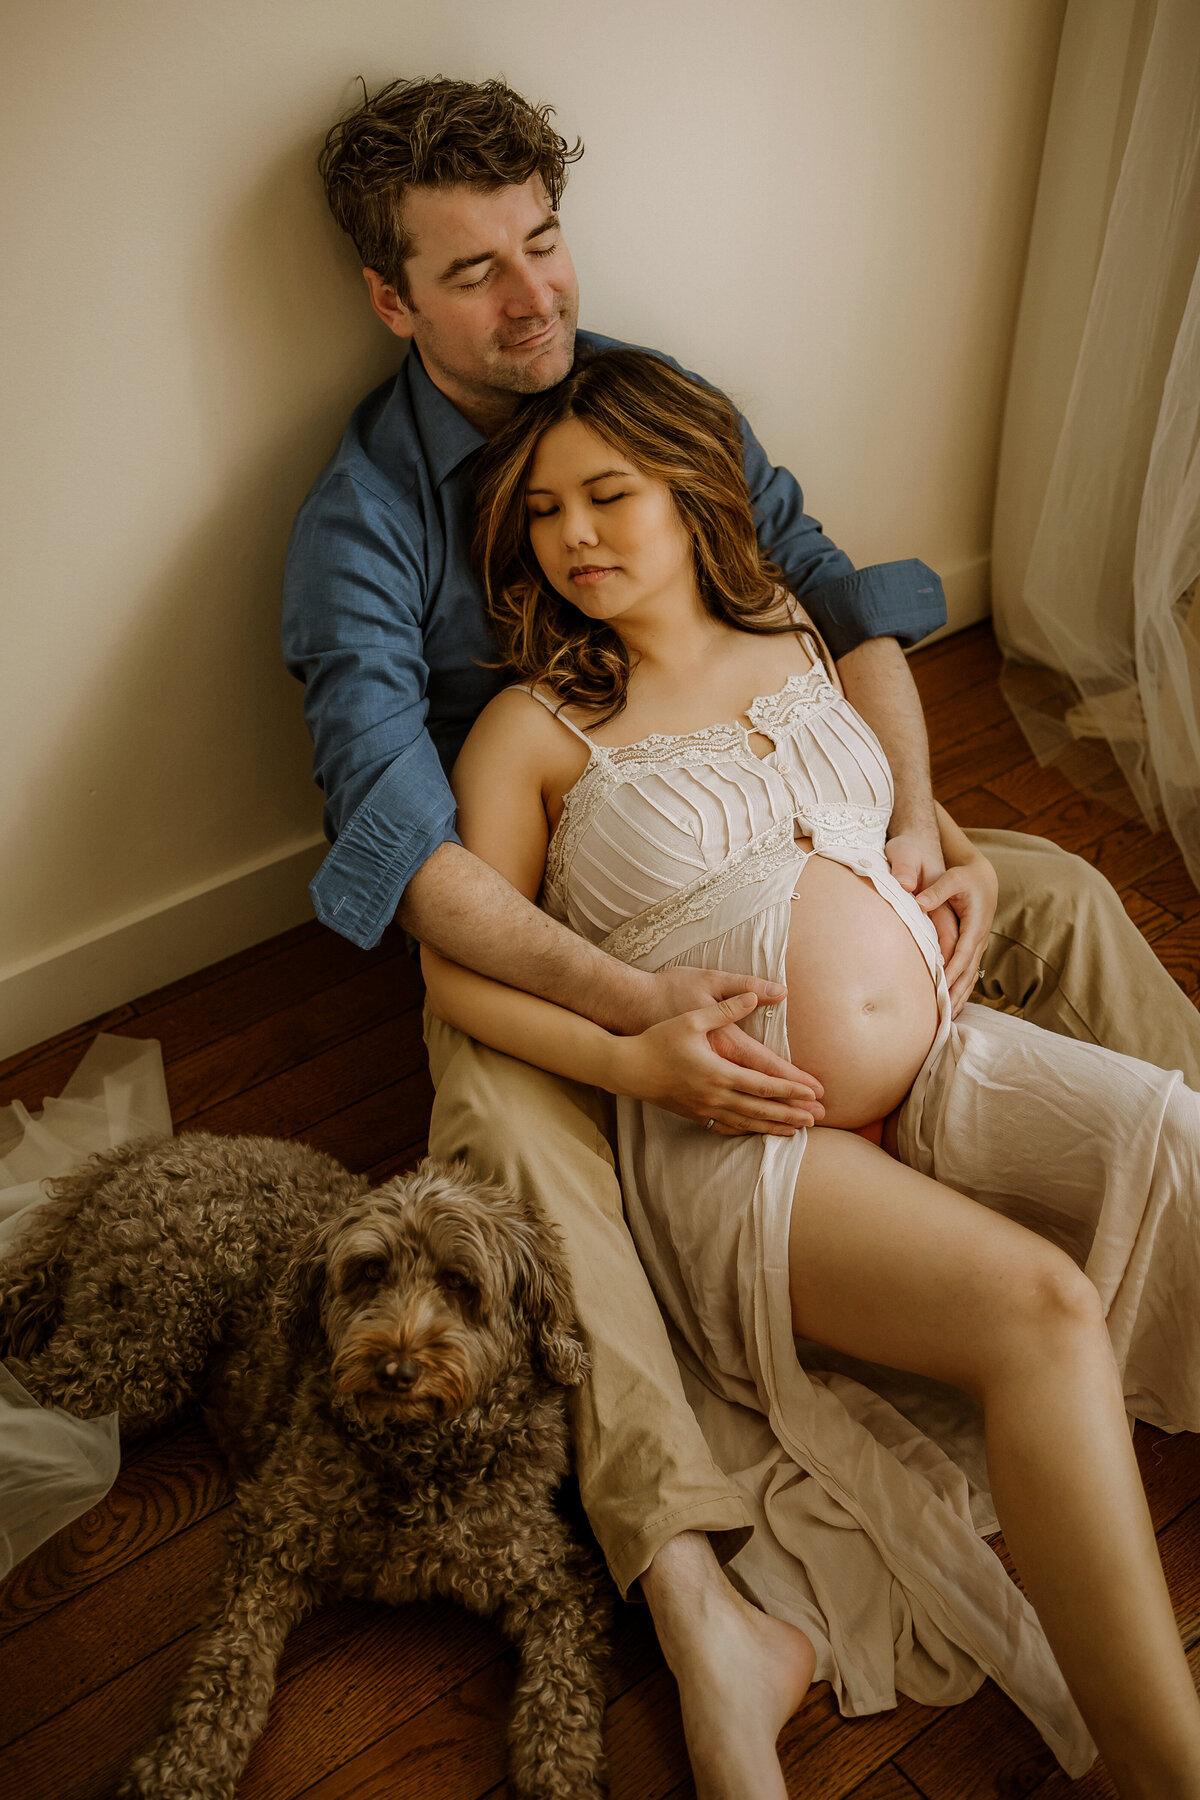 My Calgary maternity photography celebrates the radiance of expecting moms. Join me for a session that captures the beauty and glow of this remarkable period.